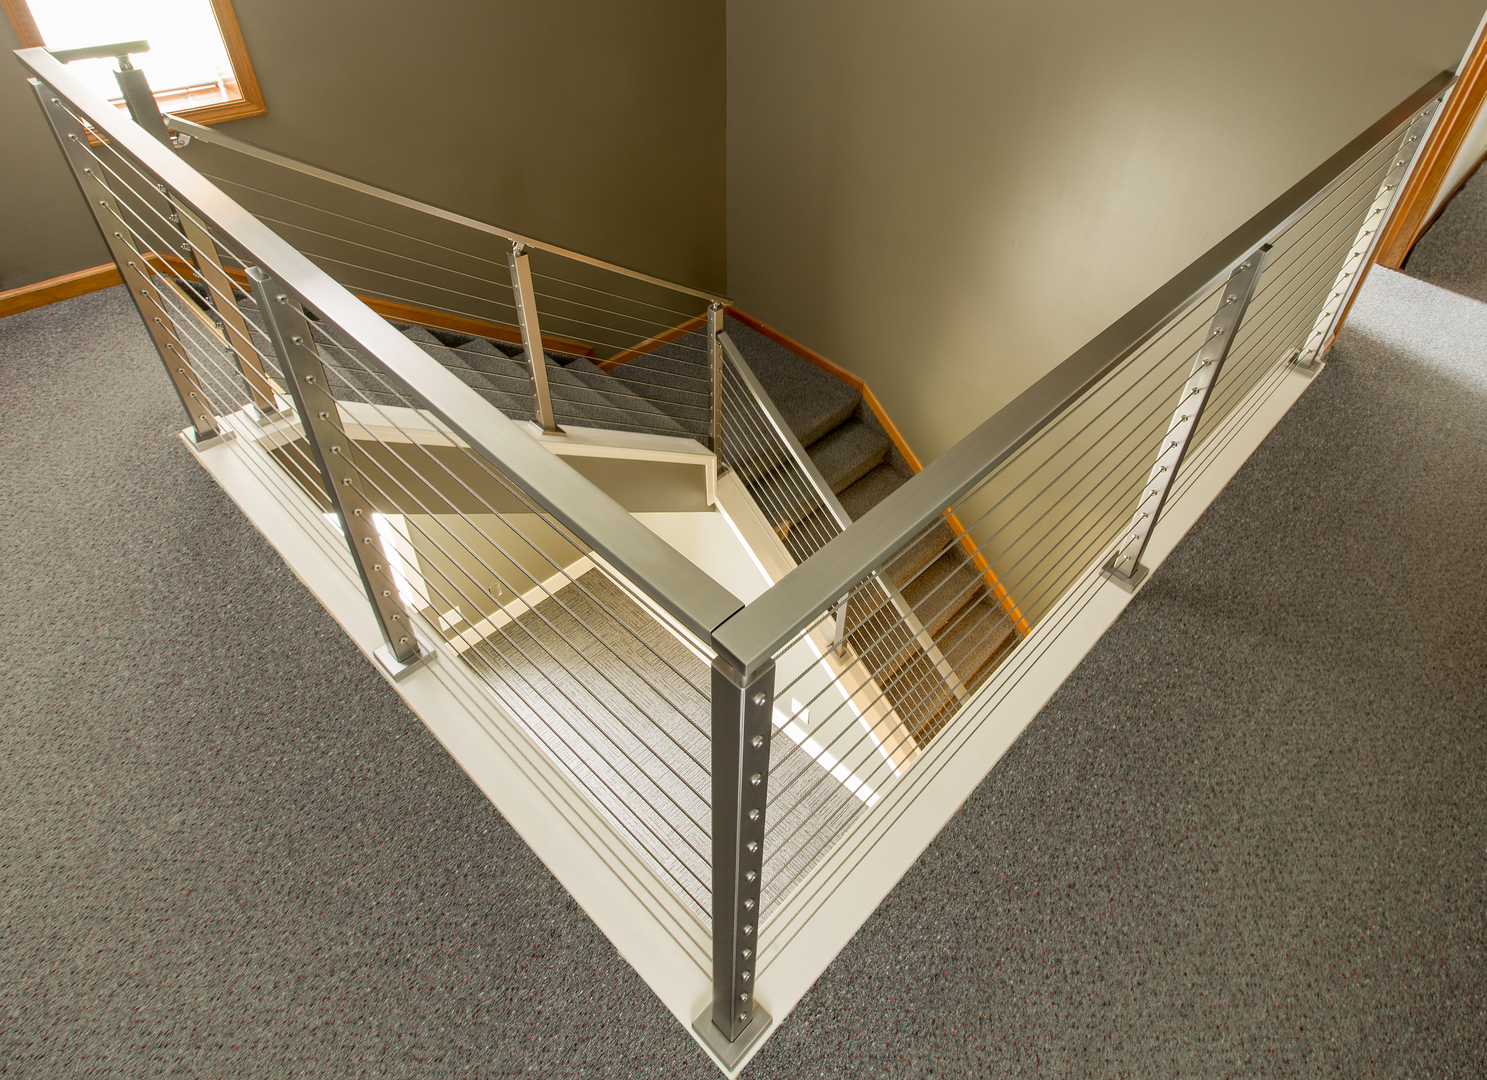 installed silver cable railings on a staircase